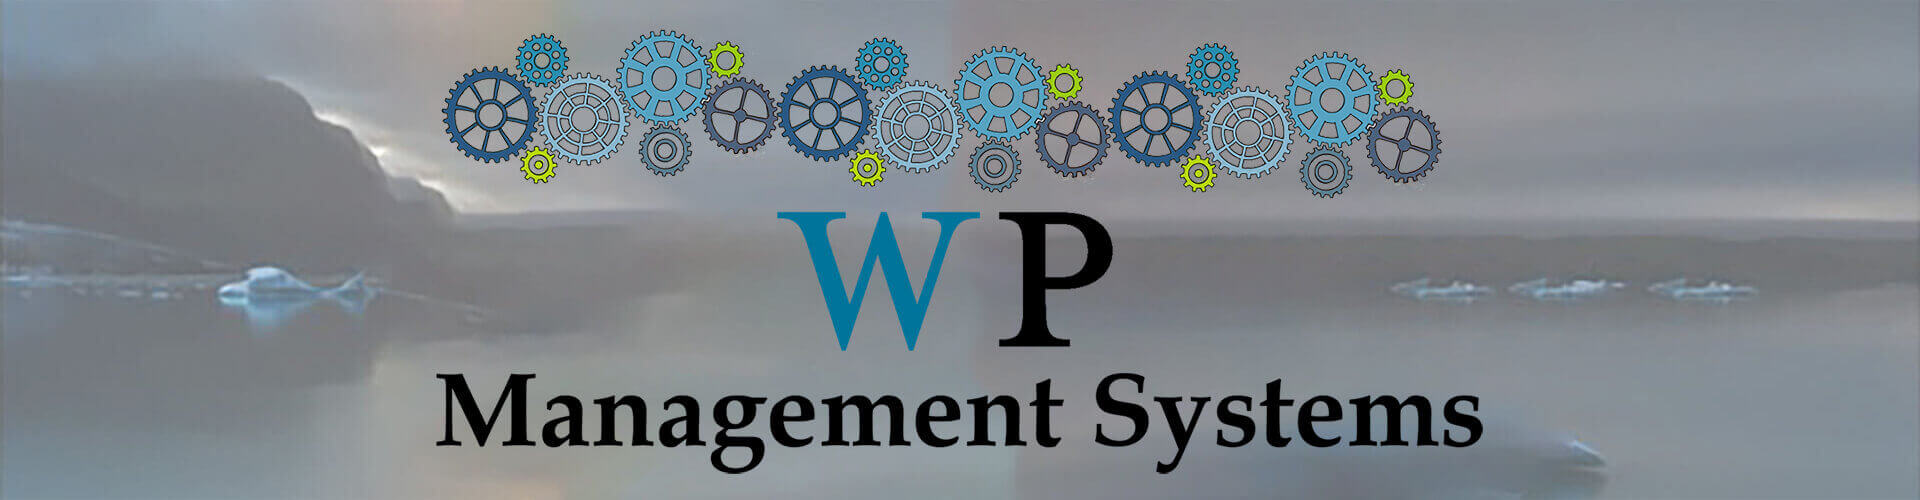 WordPress Management Systems Header Picture